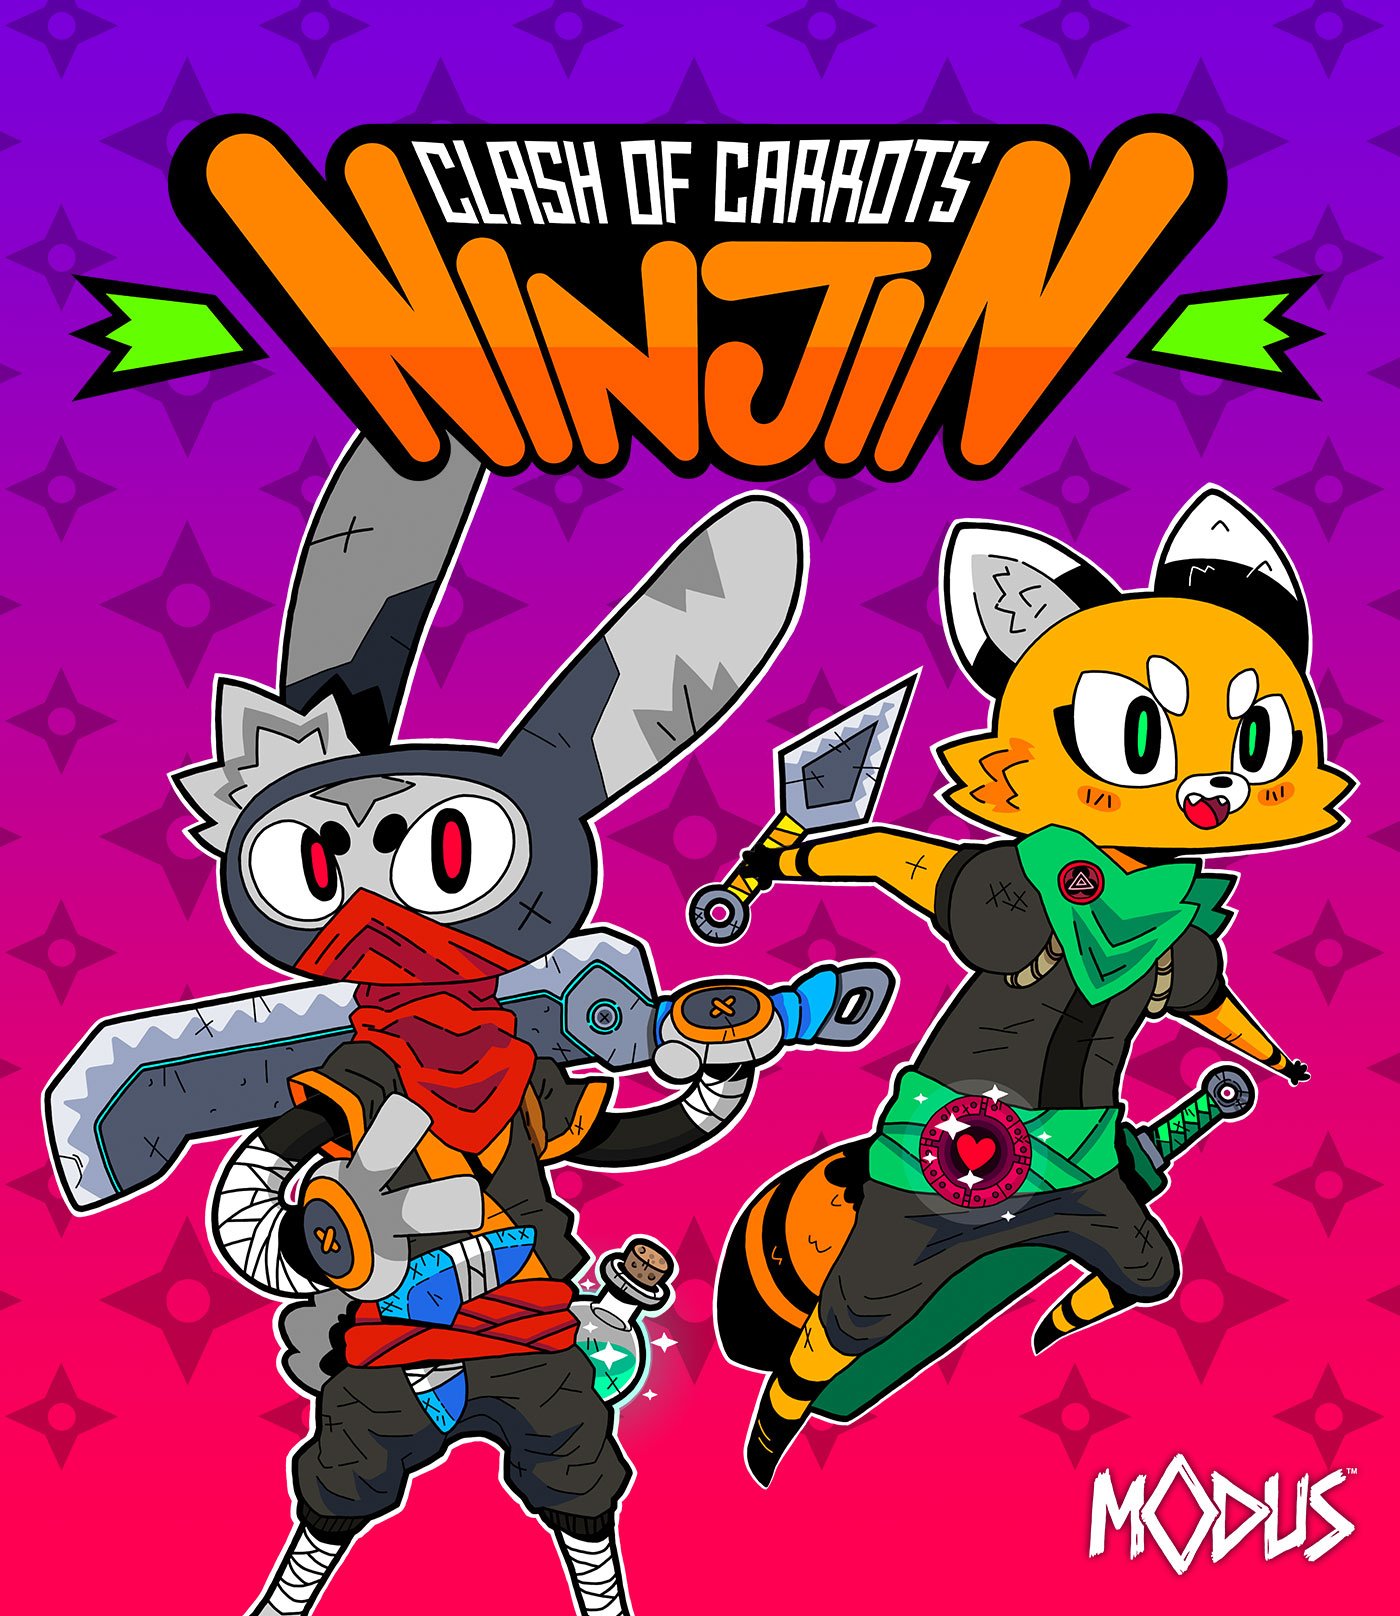 Ninjin: Clash of Carrots Launches Today – All Your Base Online